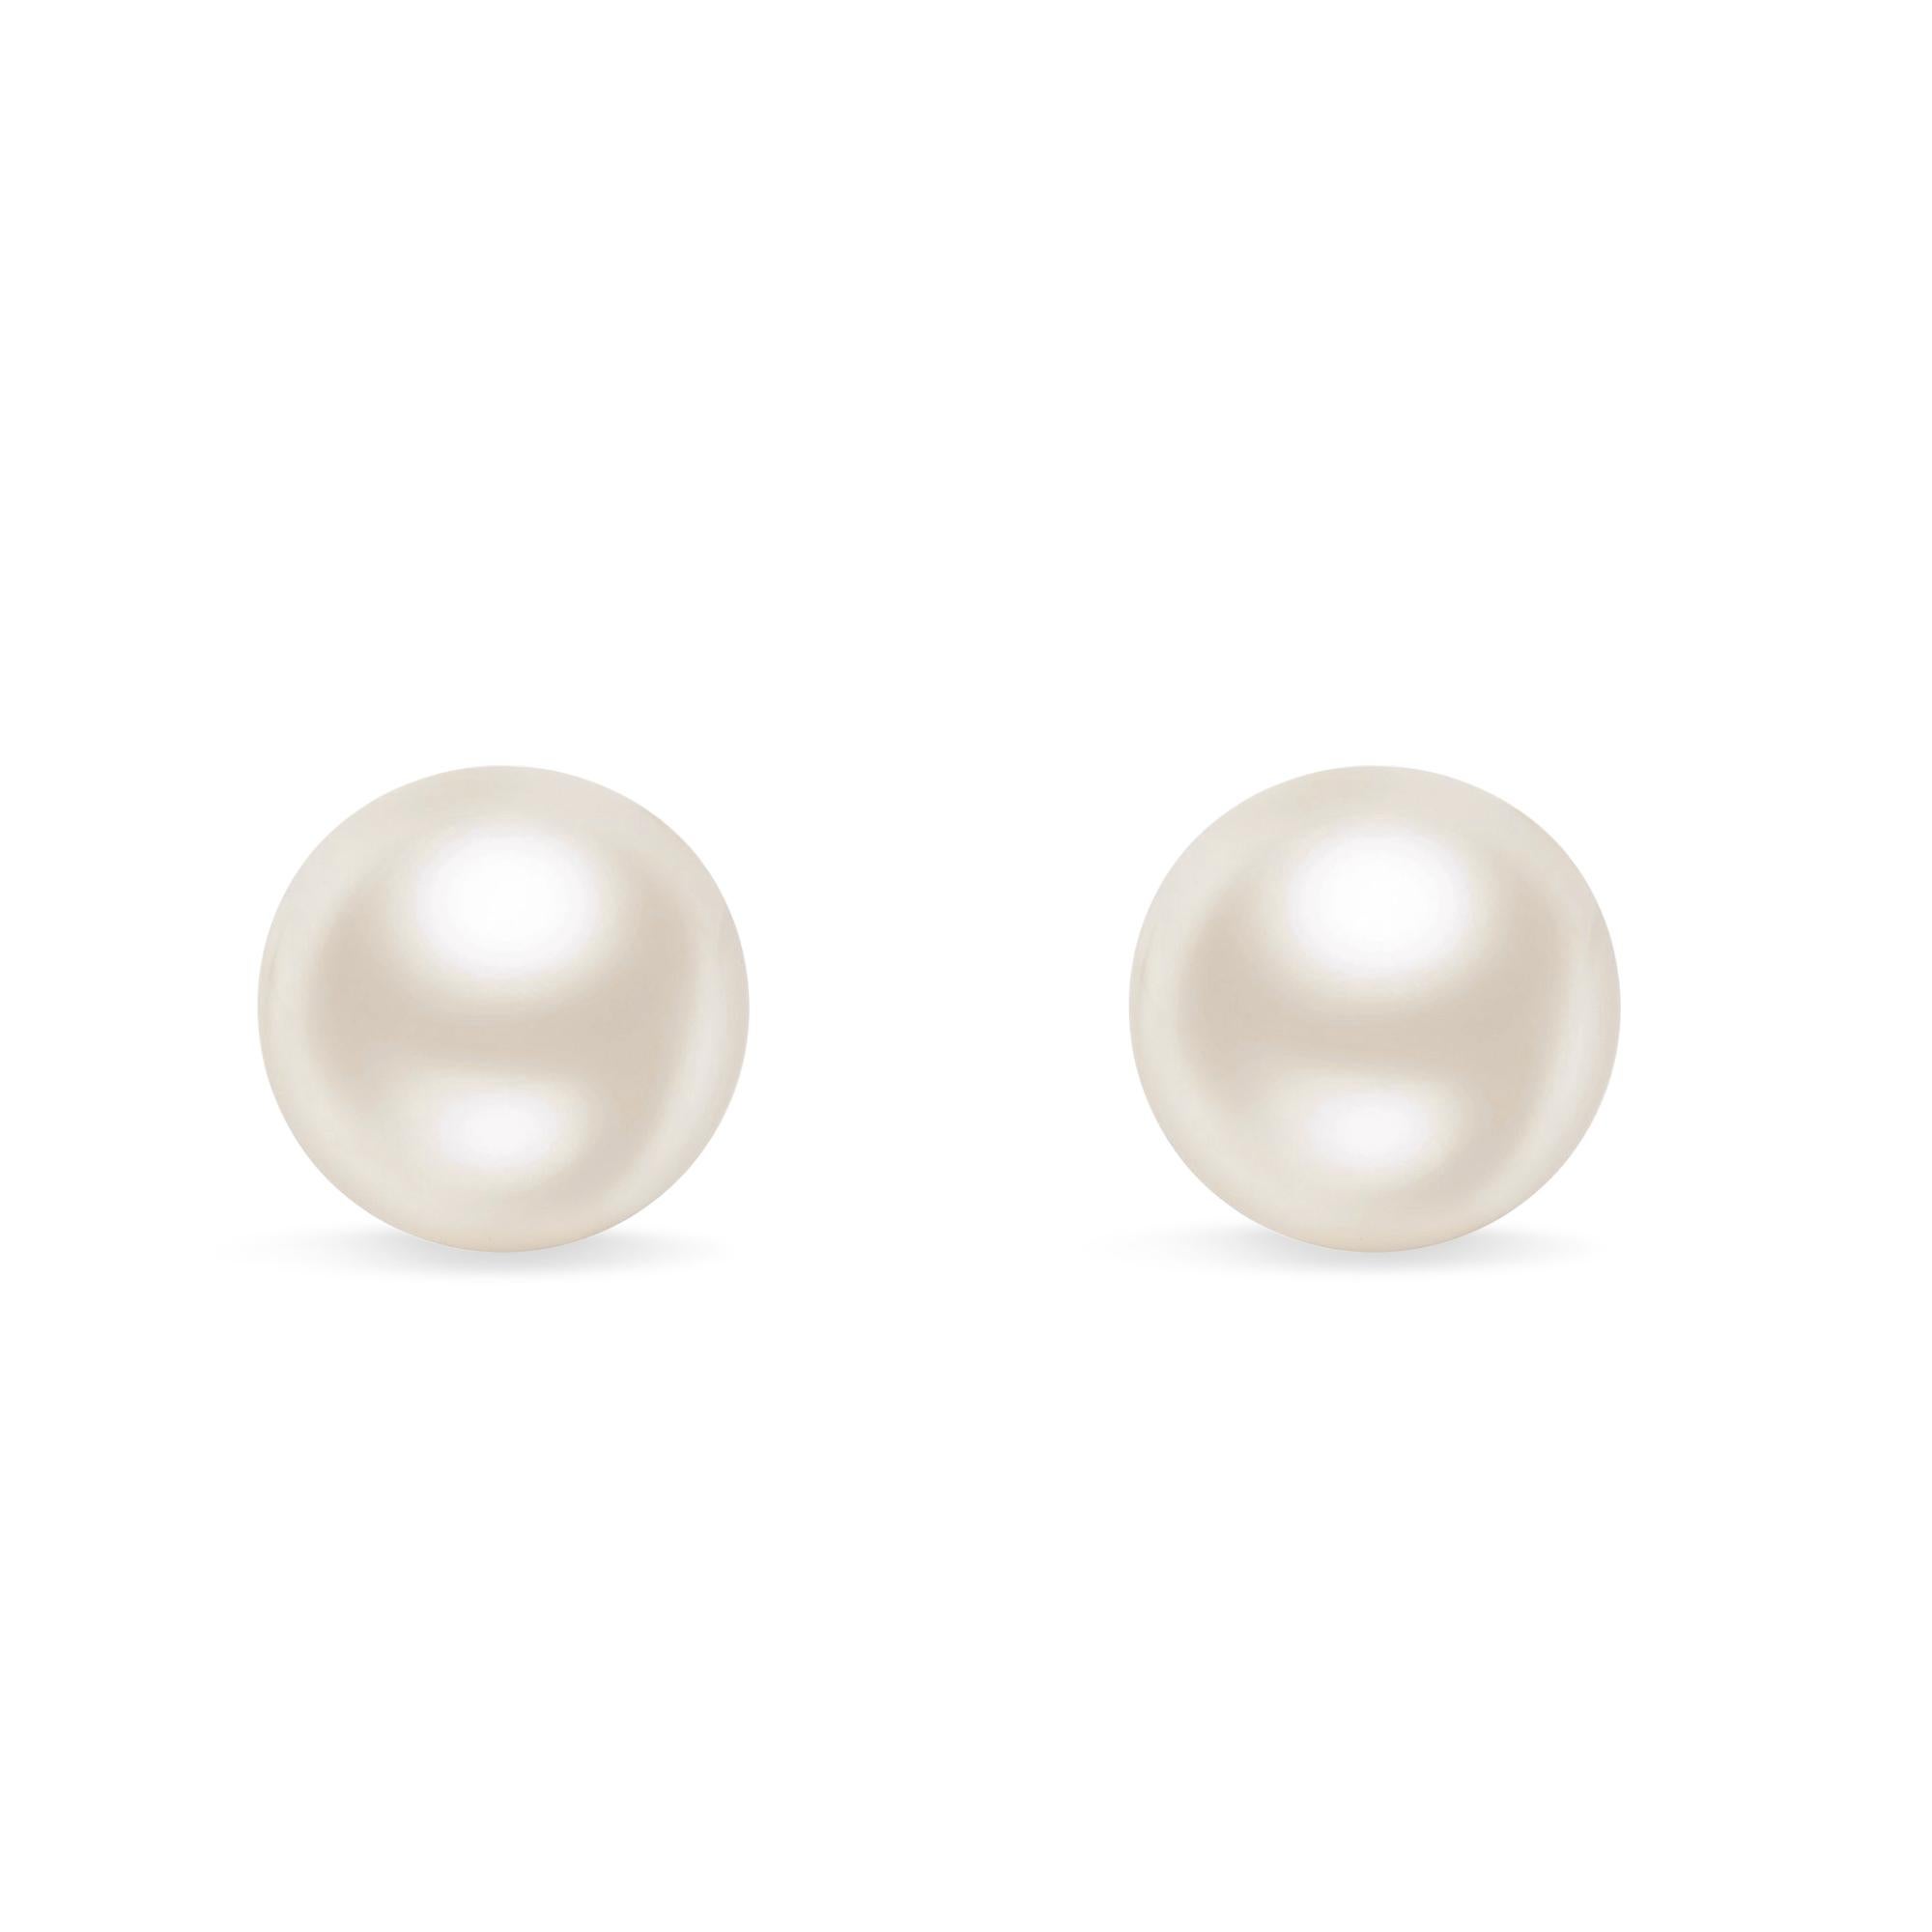 Contemporary 14K White Gold Round Freshwater Akoya Cultured AAA+ Quality Pearl Stud Earrings For Sale